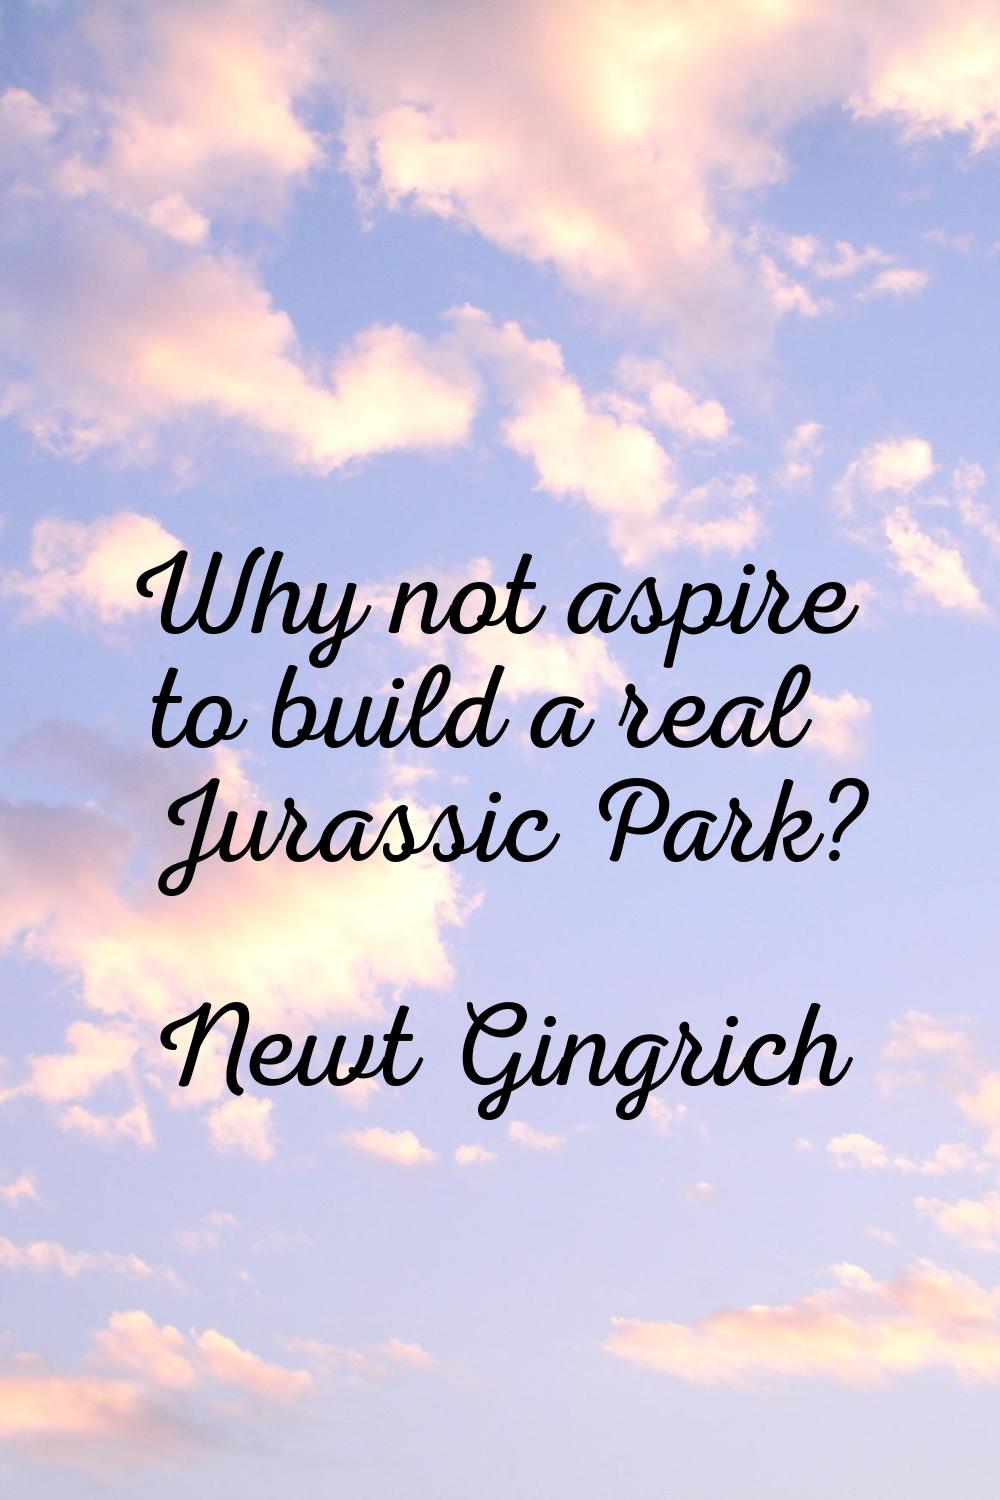 Why not aspire to build a real Jurassic Park?